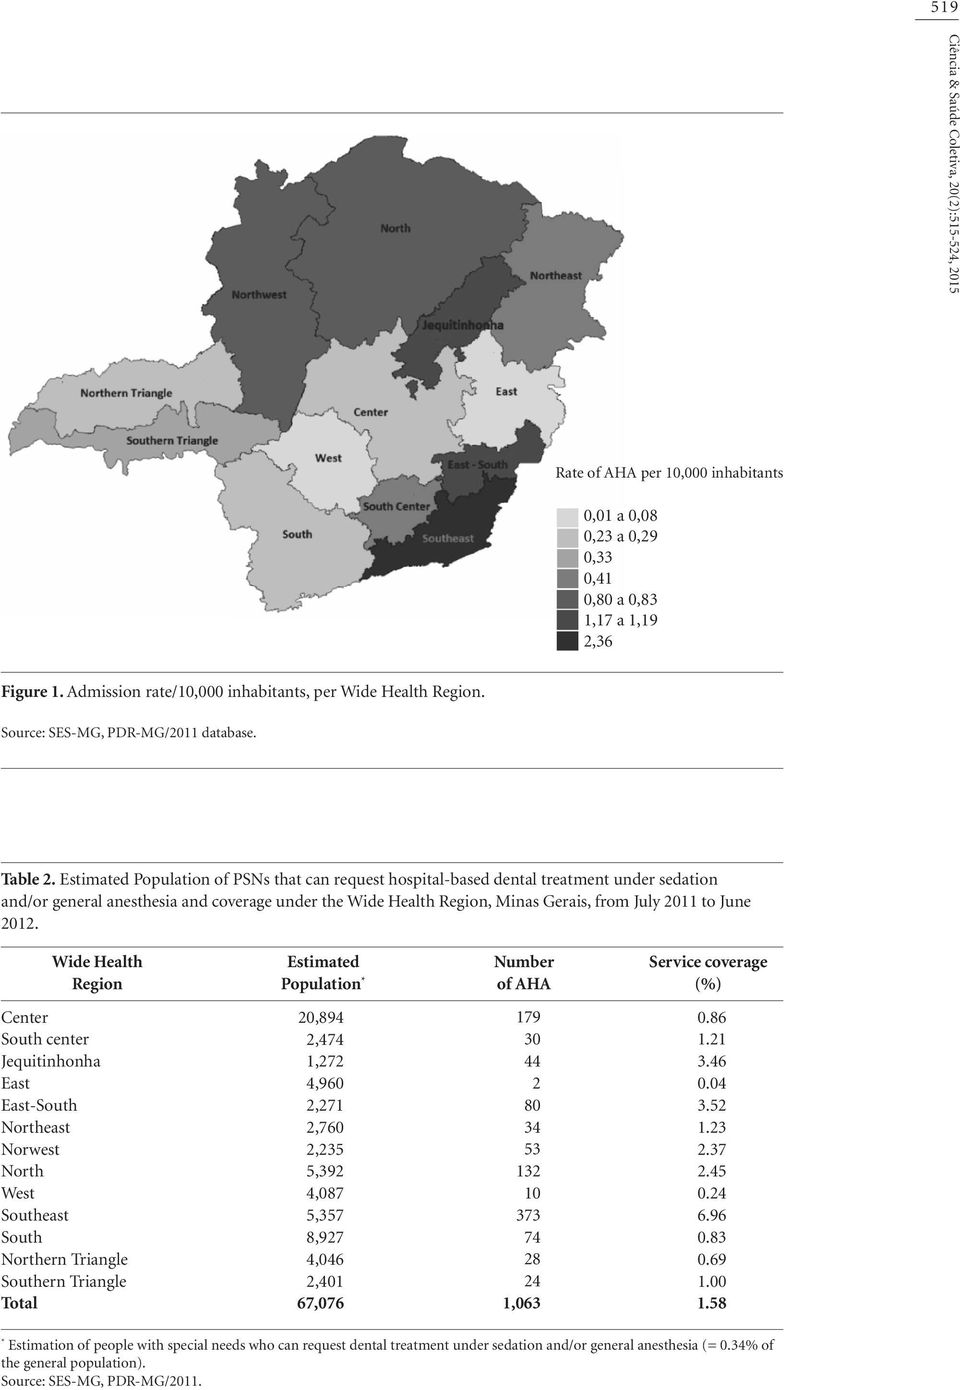 Estimated Population of PSNs that can request hospital-based dental treatment under sedation and/or general anesthesia and coverage under the Wide Health Region, Minas Gerais, from July 2011 to June